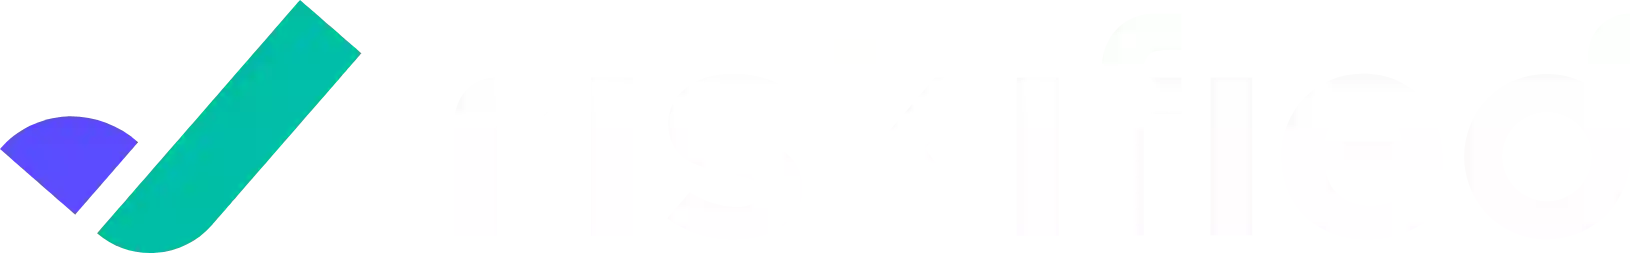 logo_Riskified_white.png